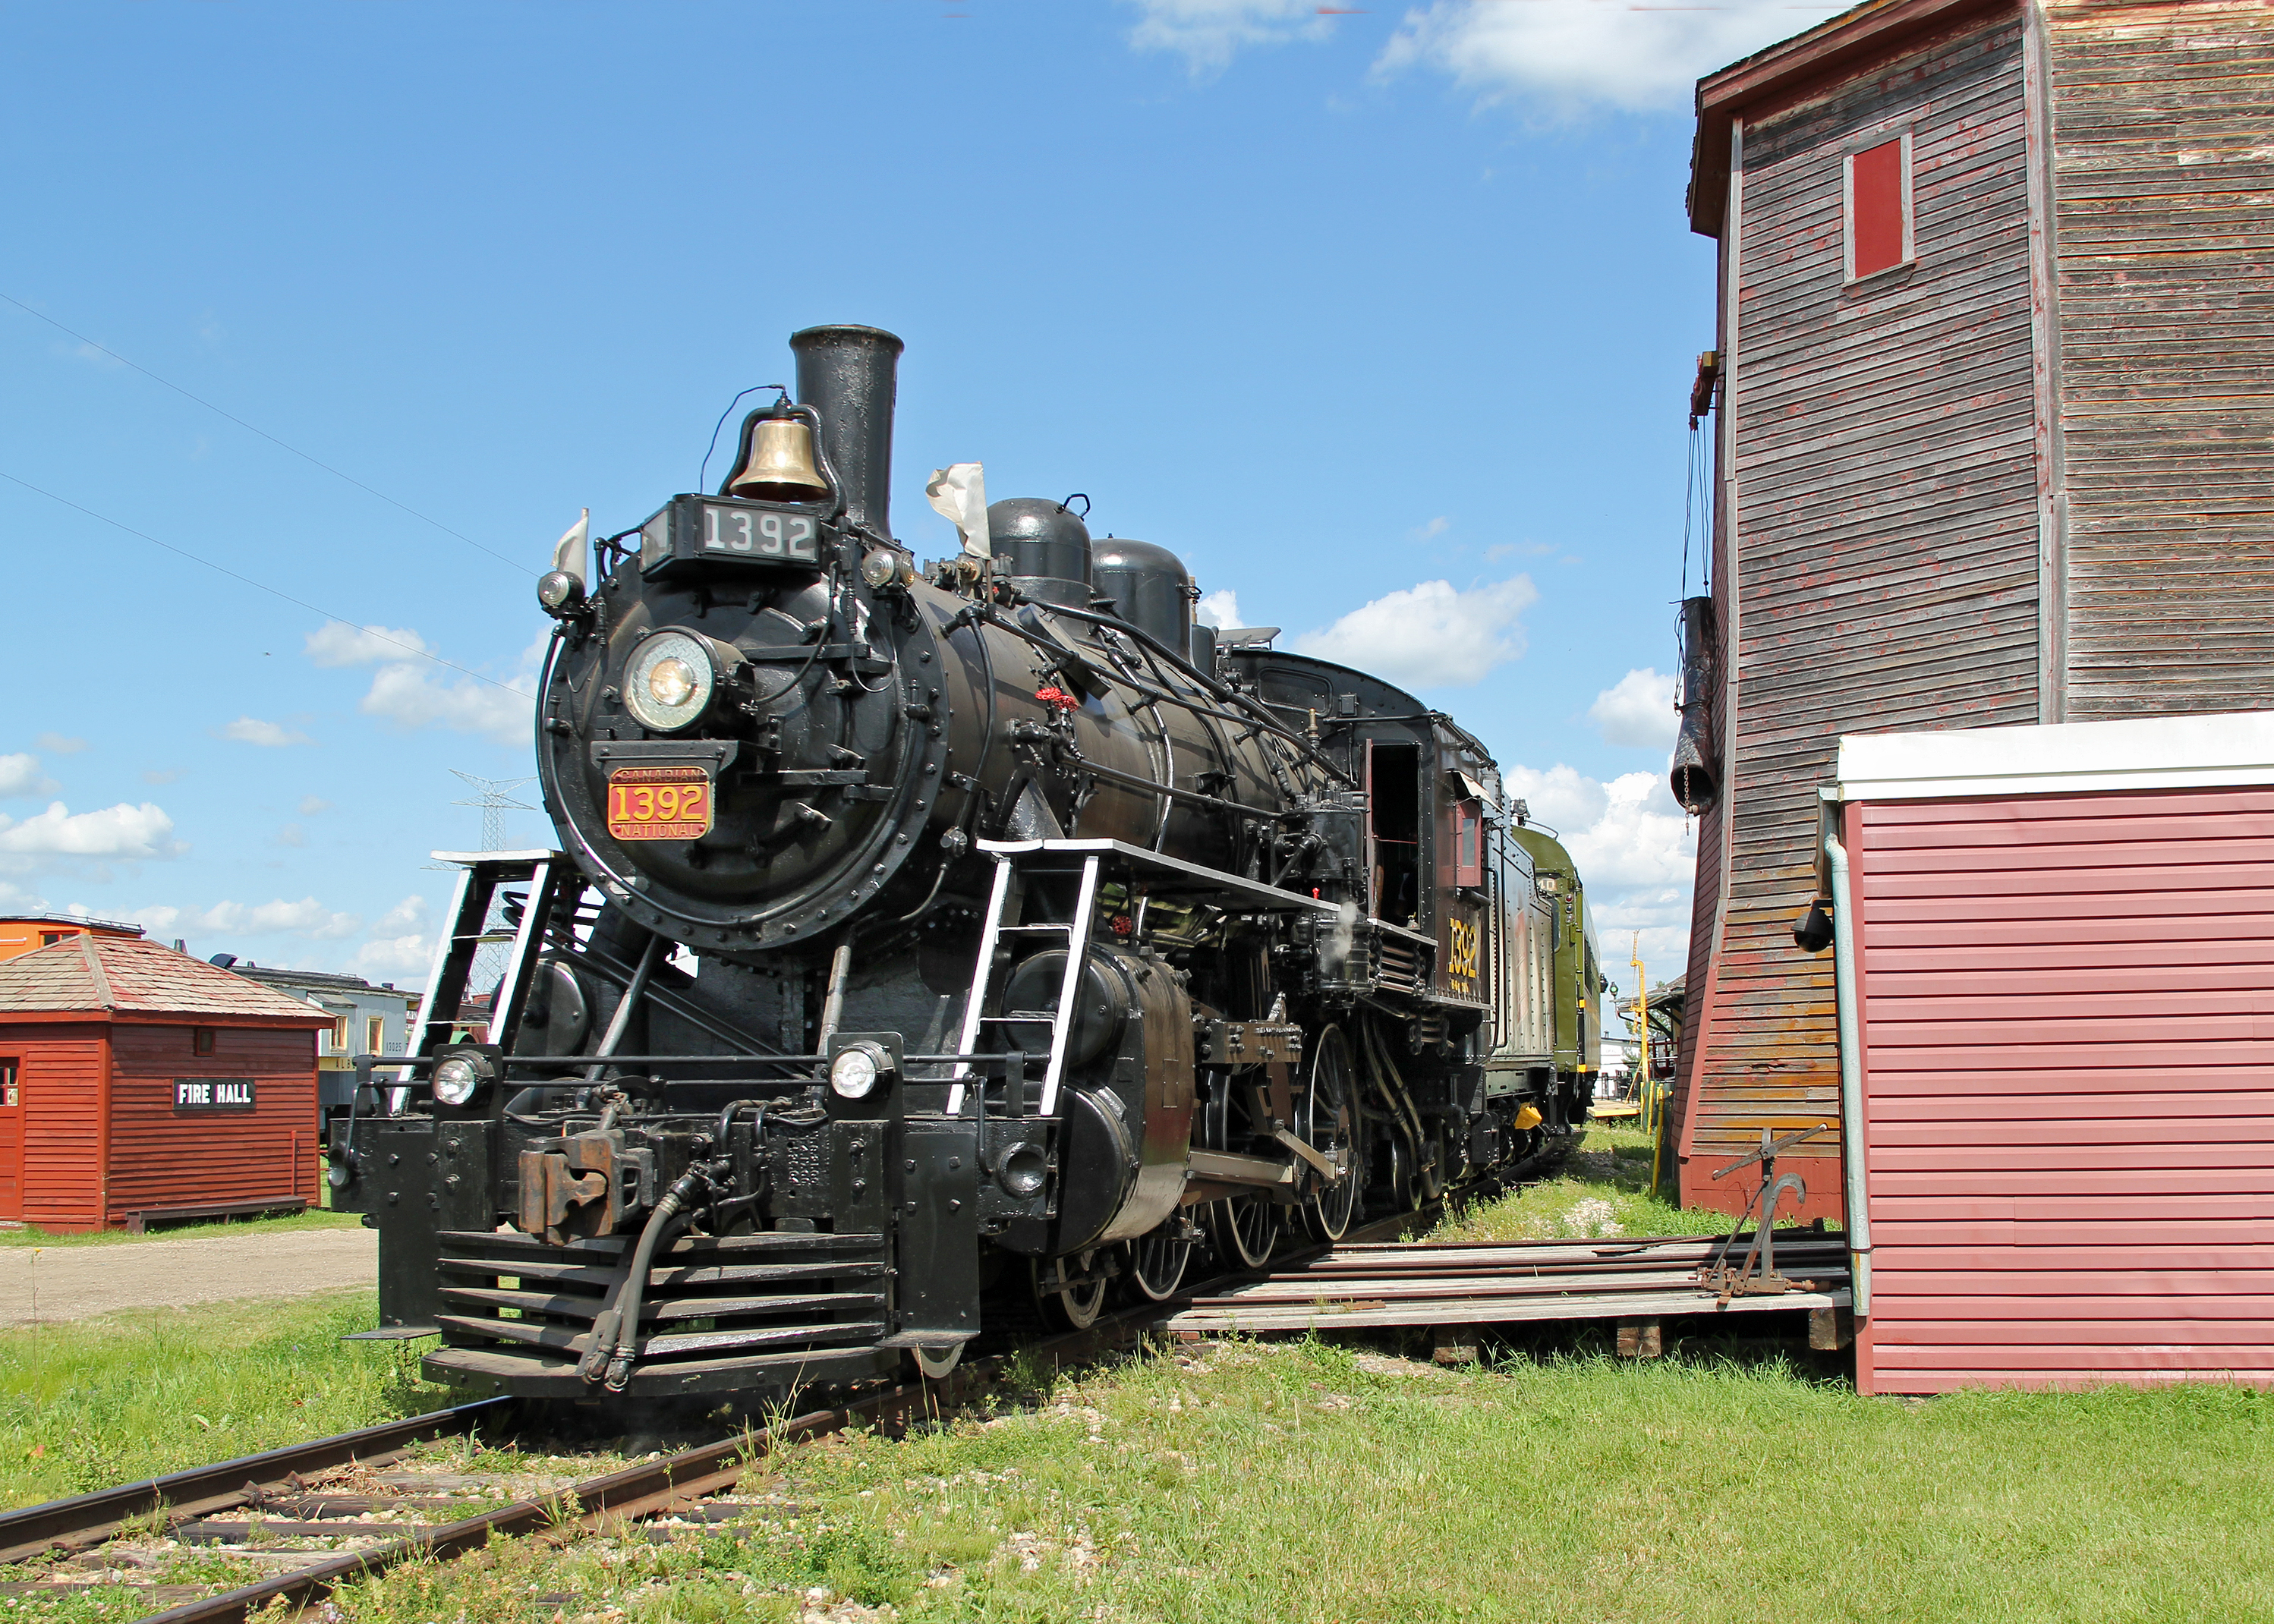  colin arnot Photo: MLW 4-6-0 CN 1392 passes the preserved  Gibbons water tower at the Alberta Railway Museum